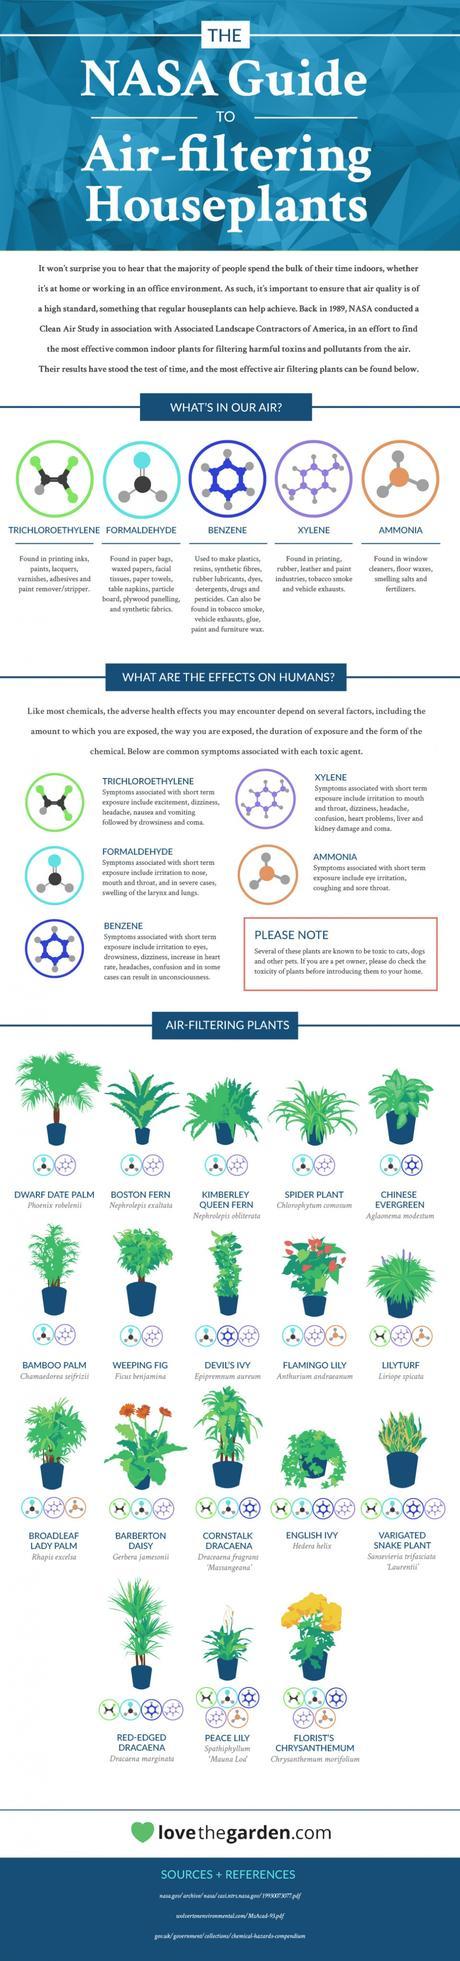 Air filtering plants infographic